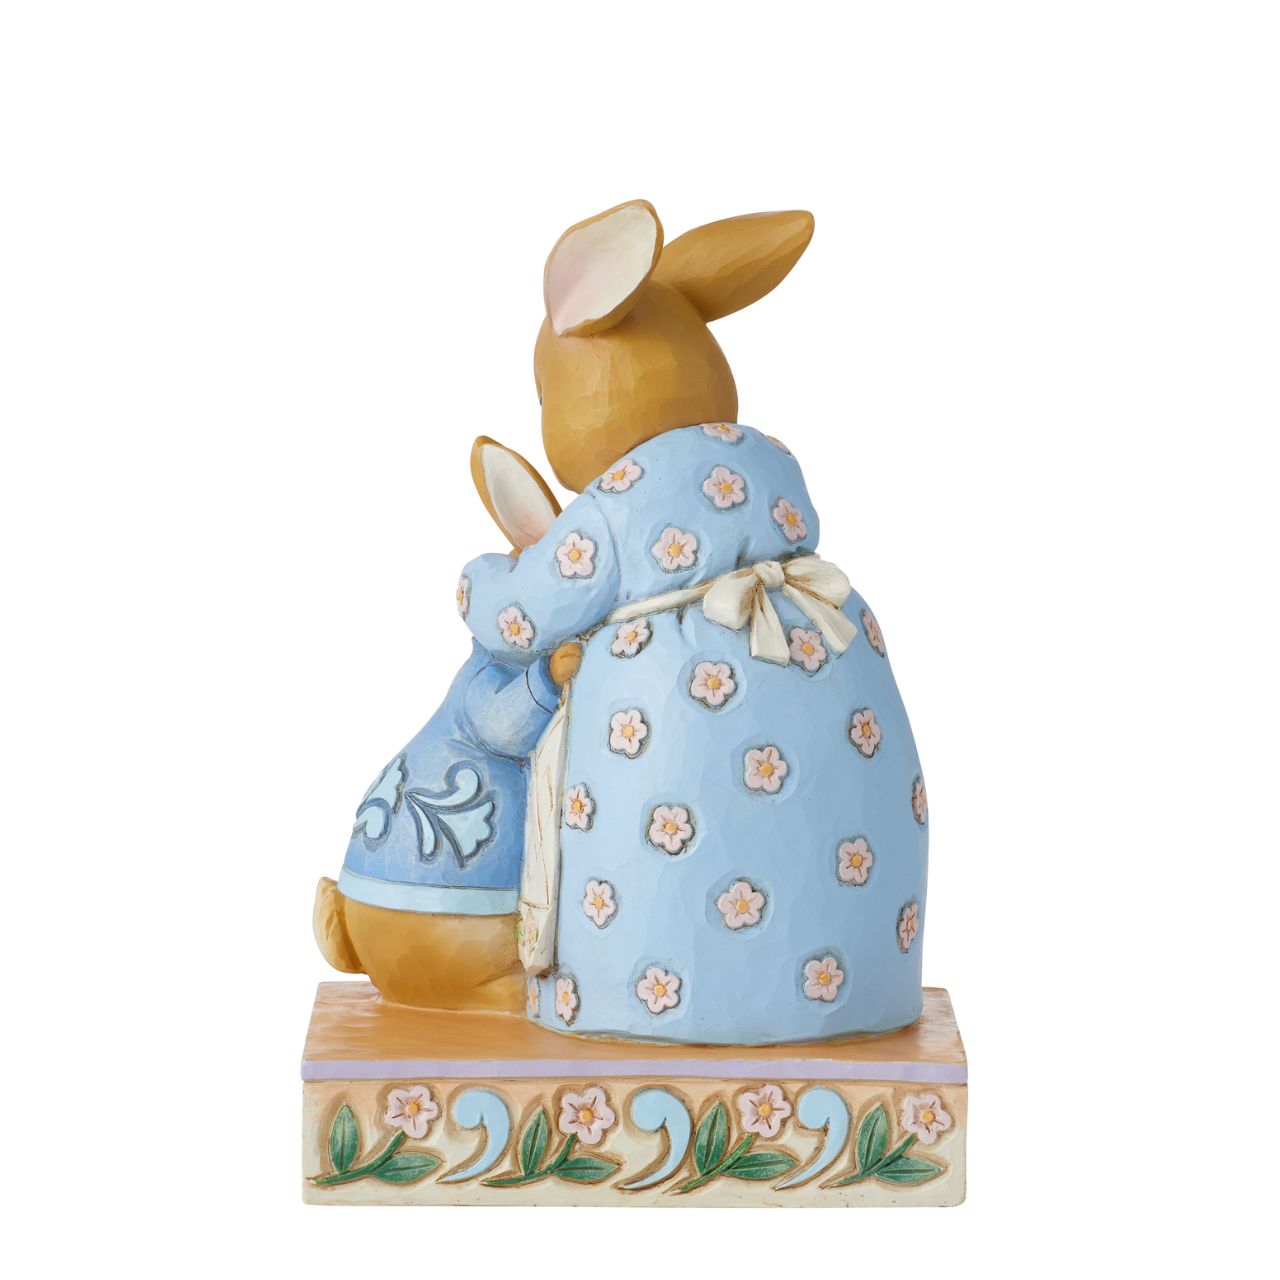 Beatrix Potter Peter Rabbit with Mrs Rabbit Figurine  Jim Shore uplifts the treasured children's characters in this darling miniature. Beloved bunny, Peter Rabbit, melts into his mother's caring embrace. Holding her sweet boy close, she provides all the encouragement he needs for a day of adventuring.